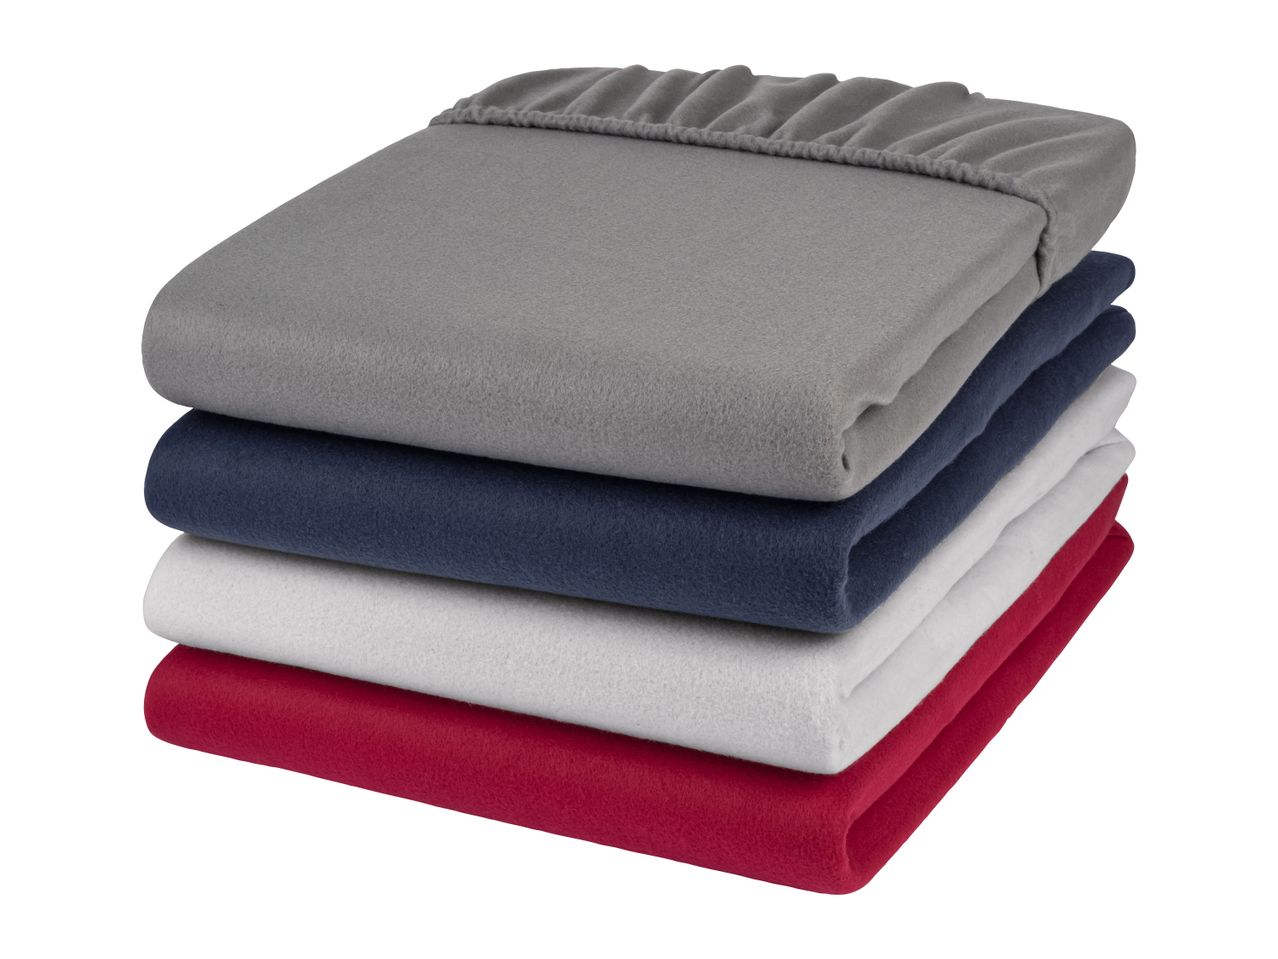 Go to full screen view: Livarno Home Fleece Fitted Sheet - Single - Image 5